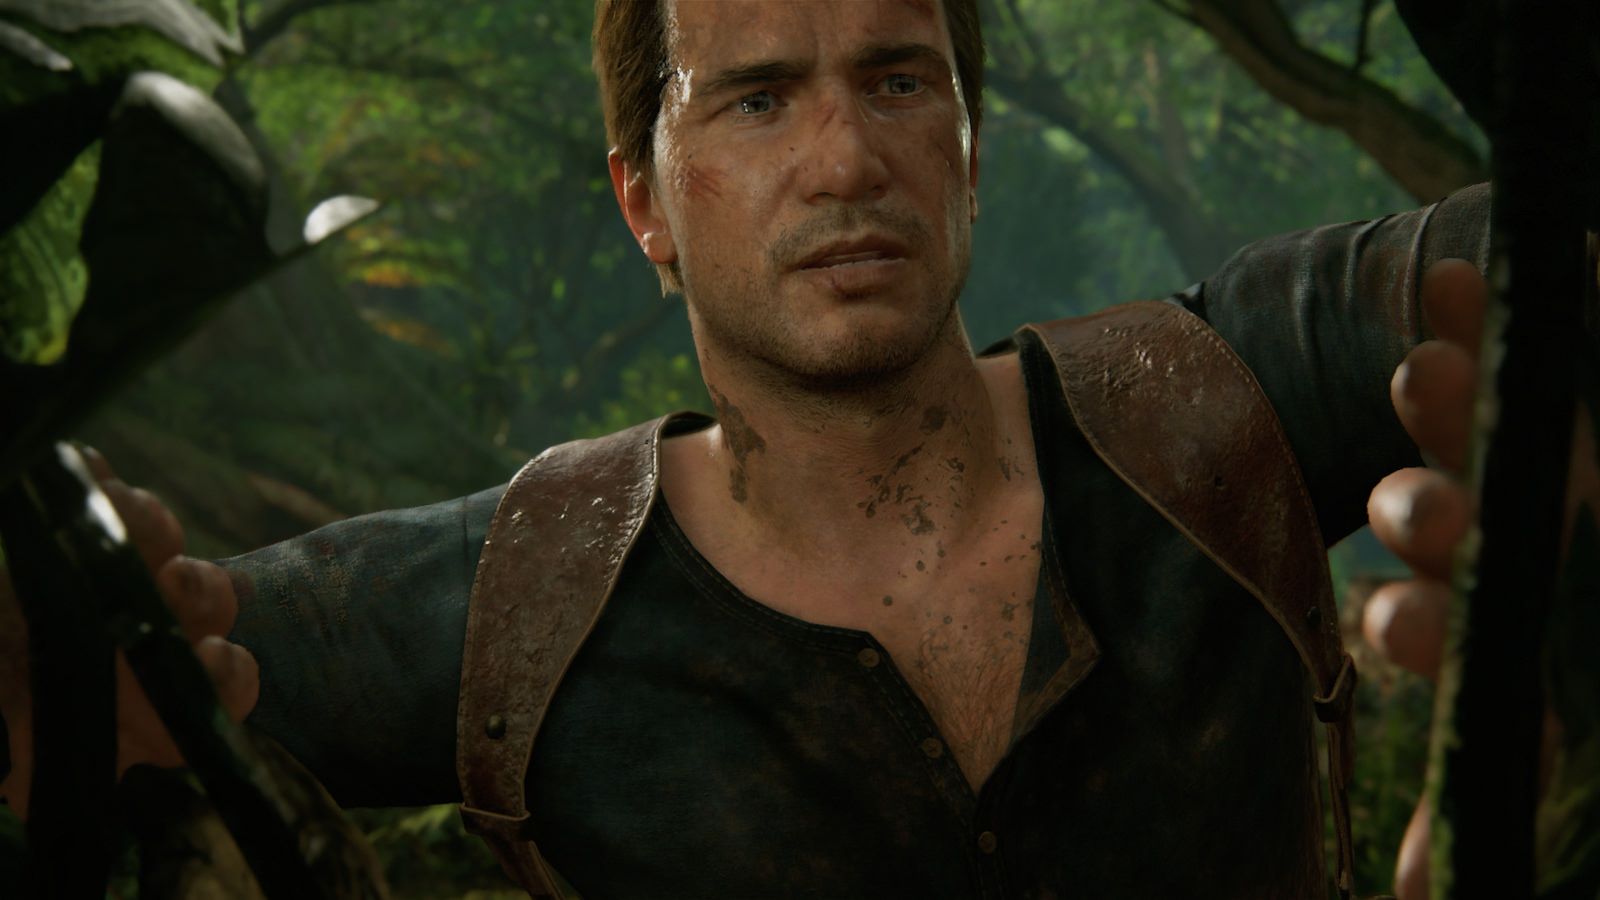 These Graphics on PC 😍 : r/uncharted